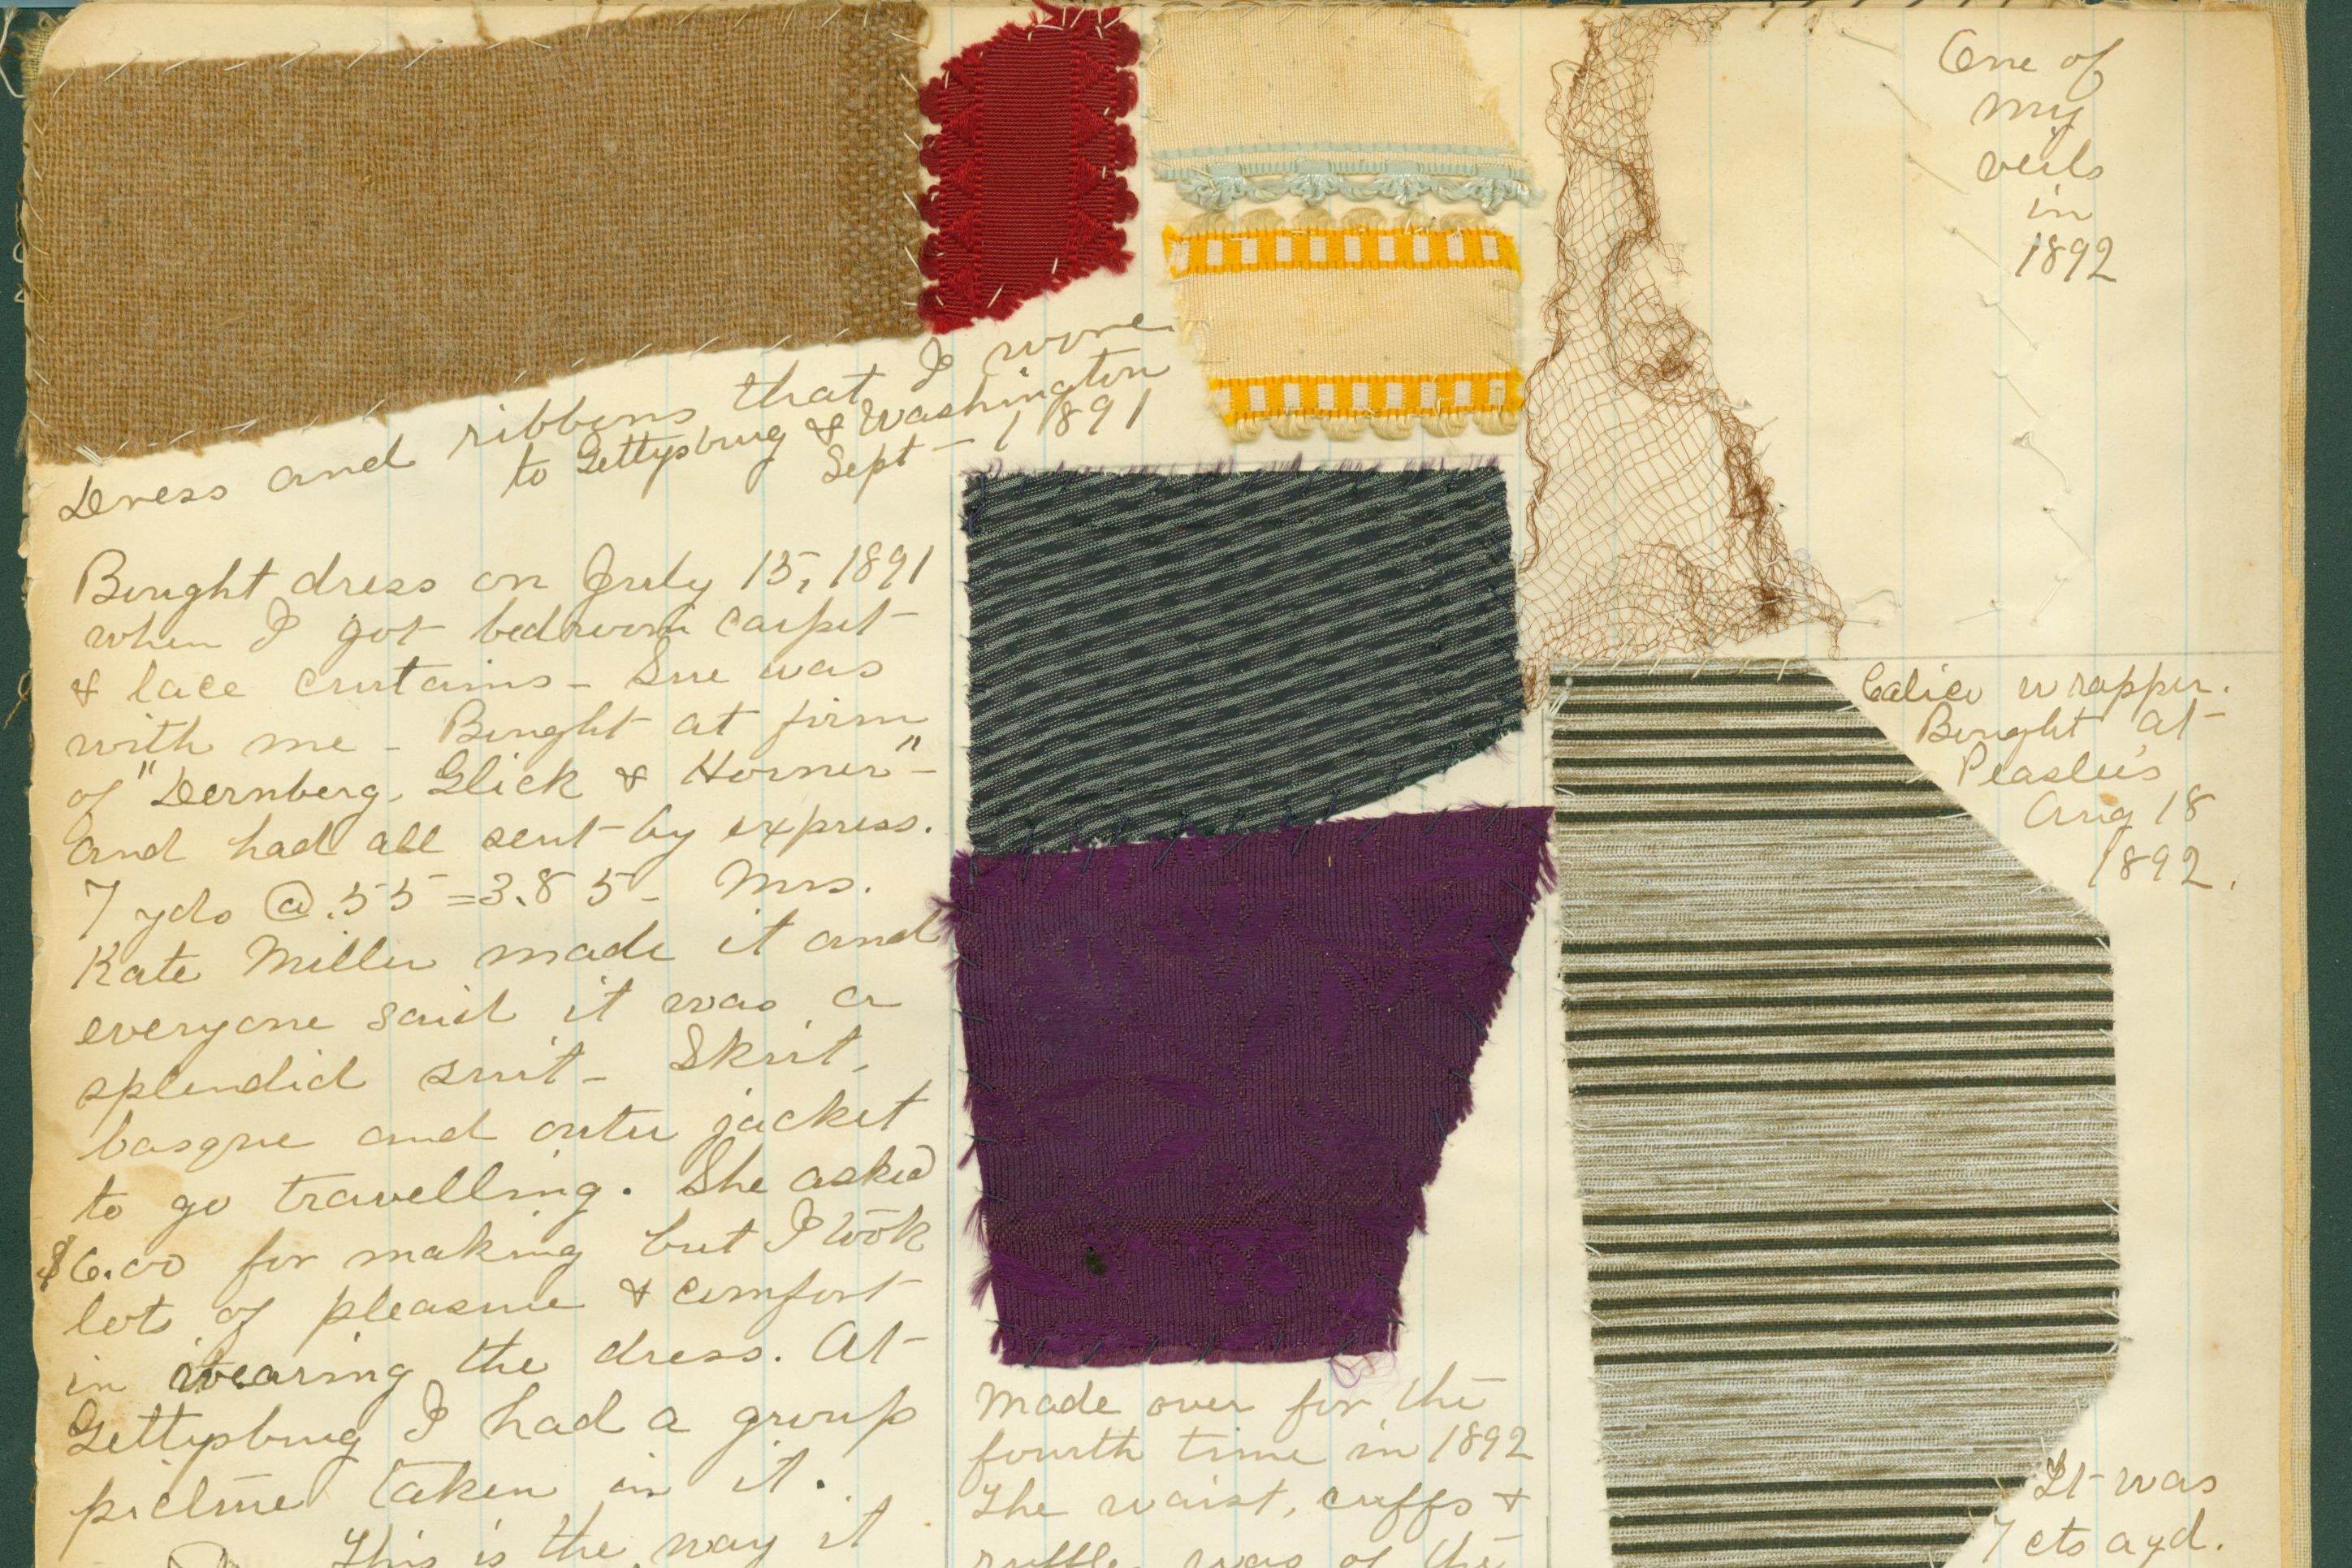 A page from Hannah Alspaugh's fabric scrapbook.